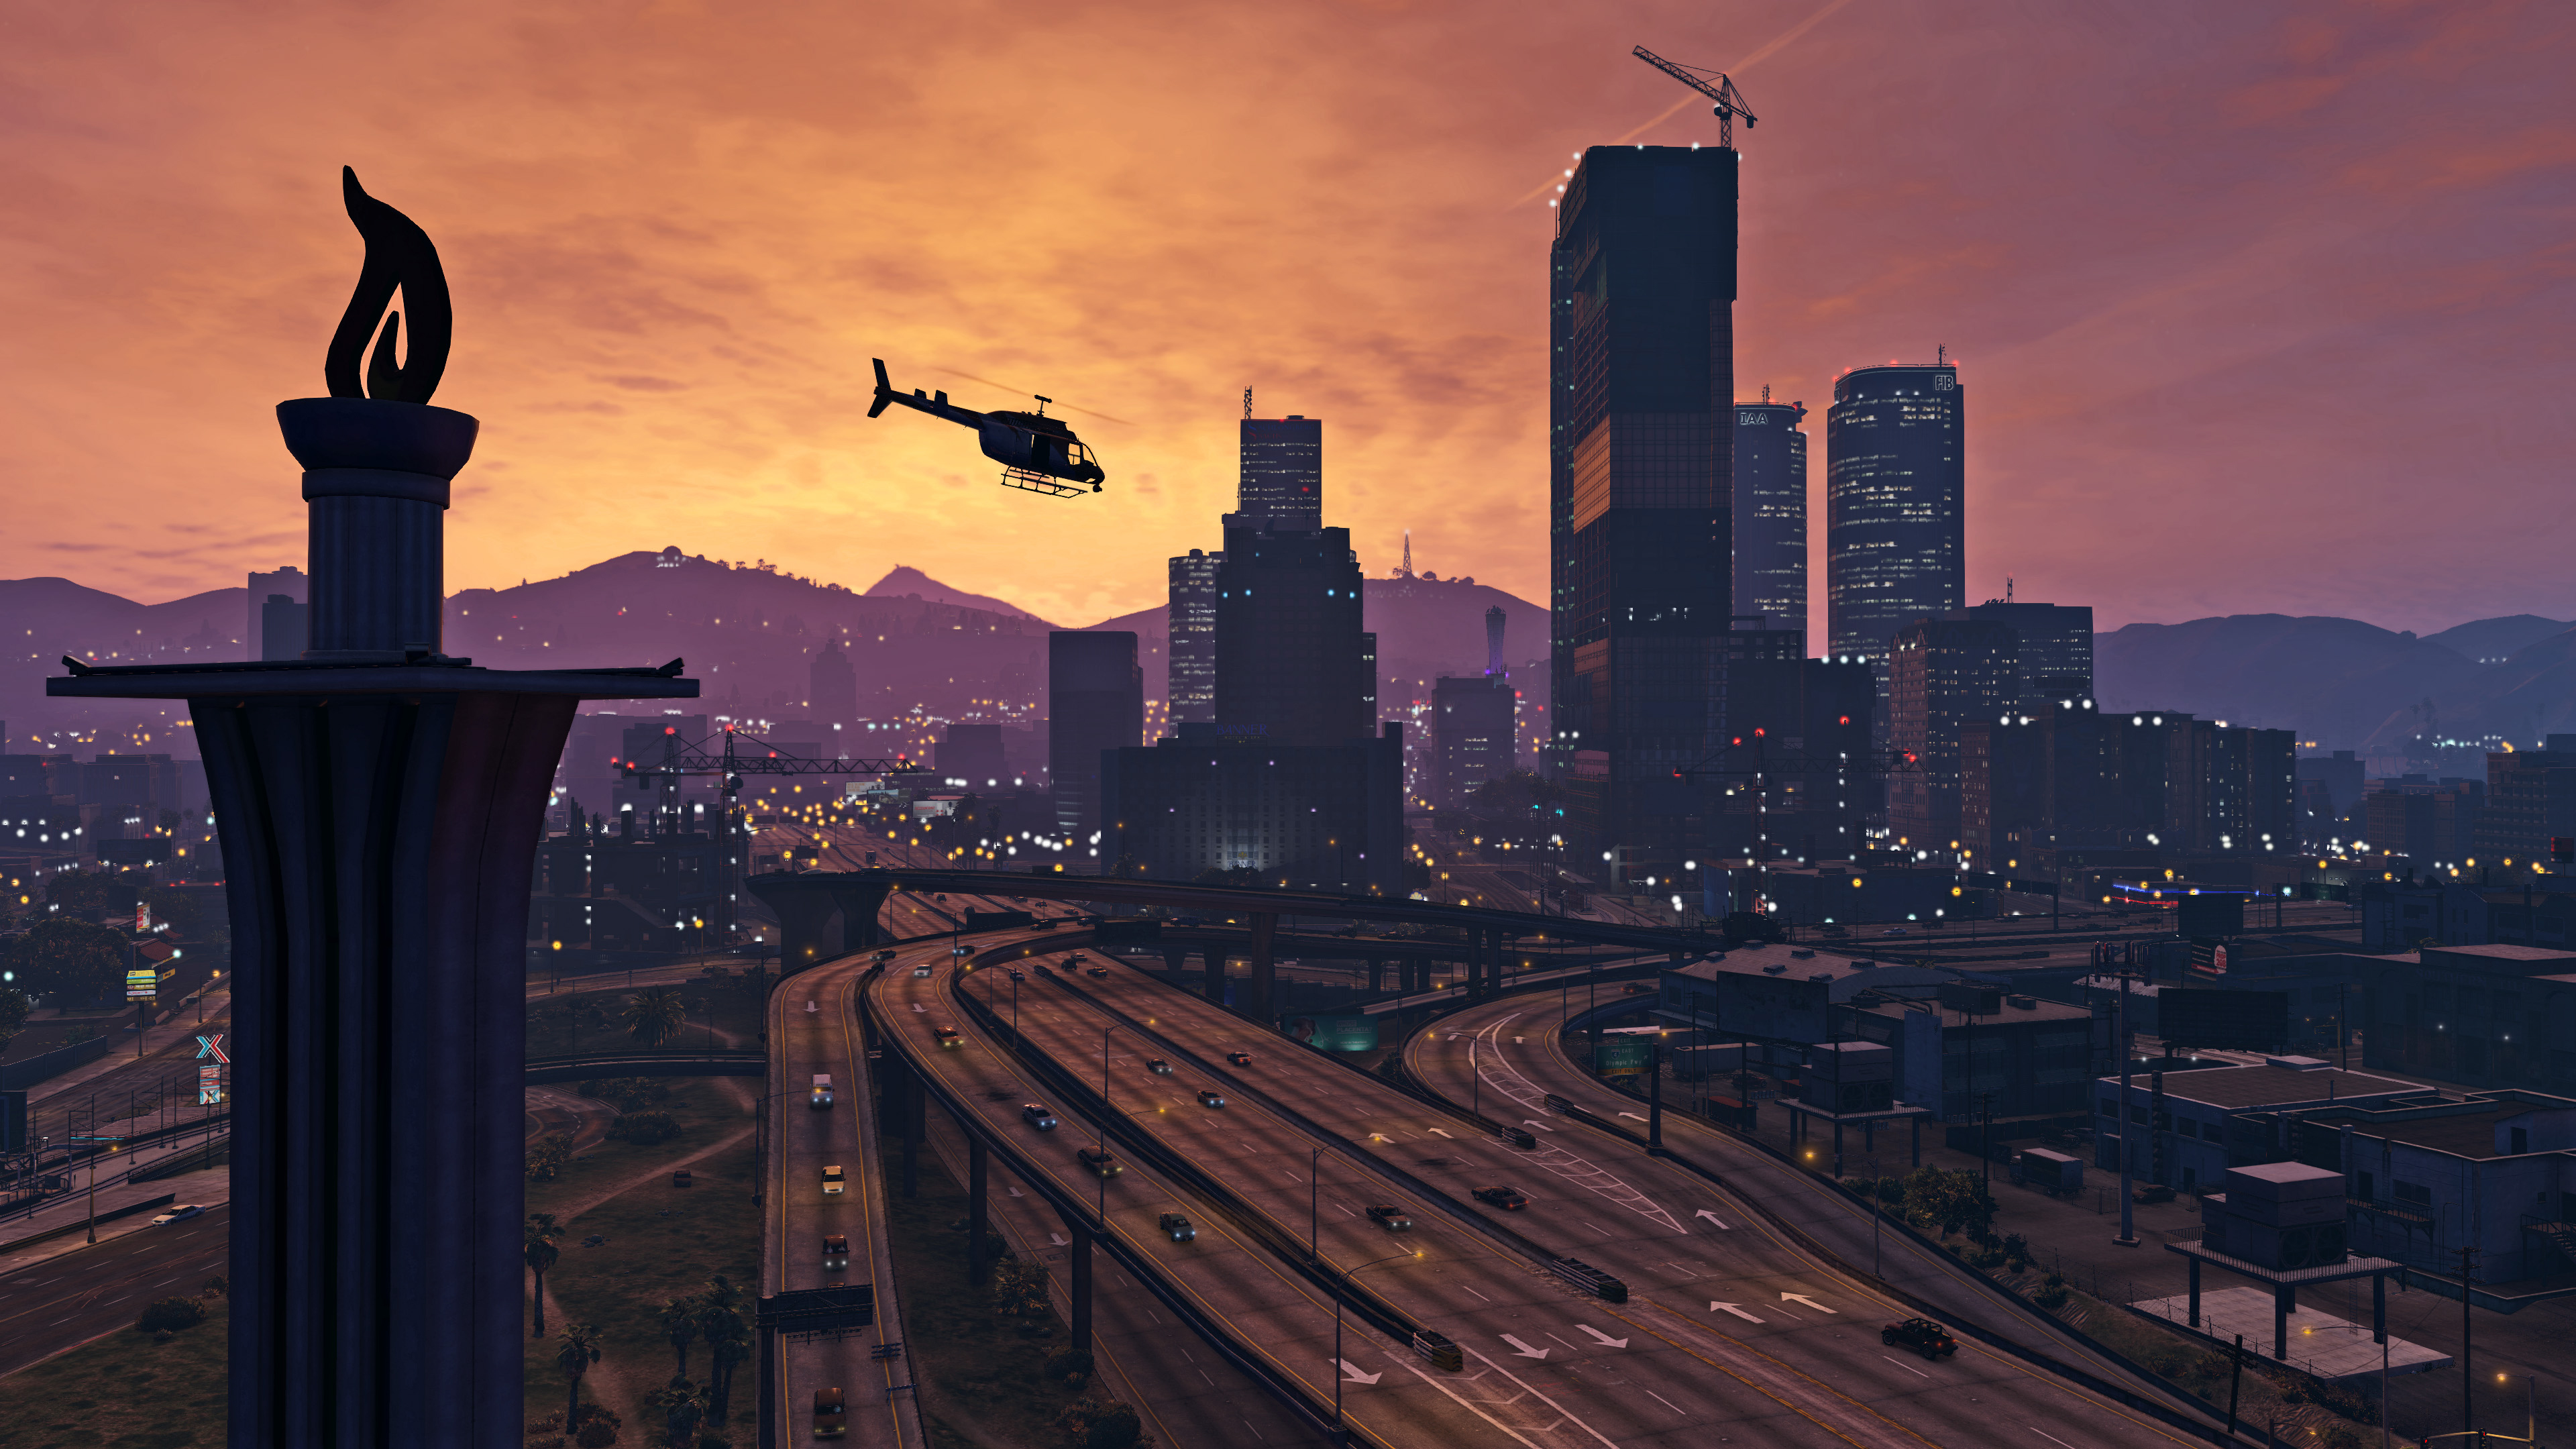 The skyline of the city in GTA 5